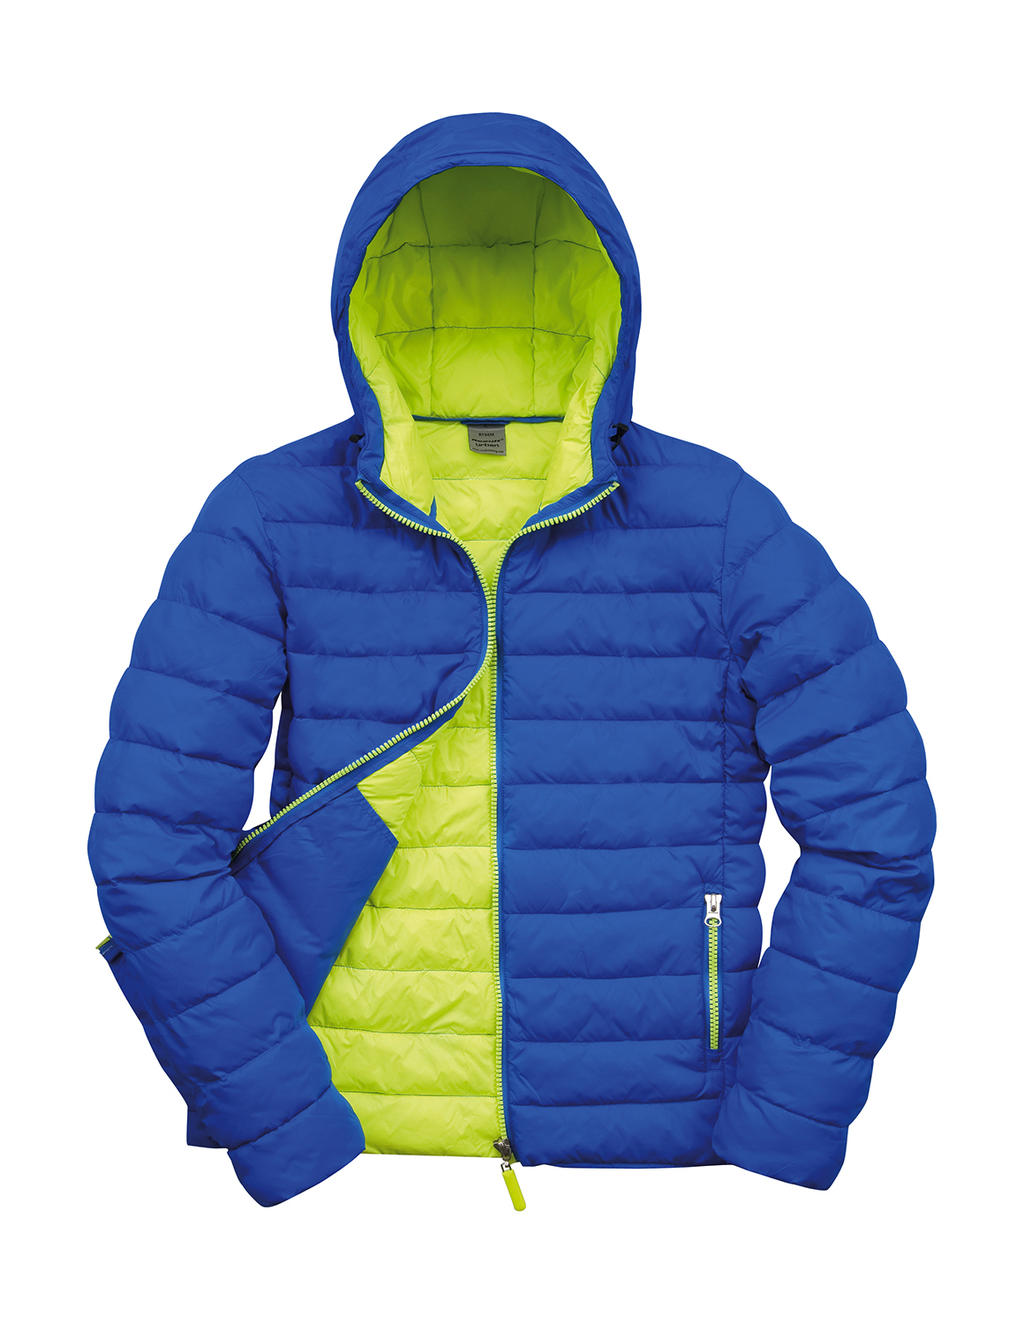  Snow Bird Hooded Jacket in Farbe Ocean Blue/Lime Punch